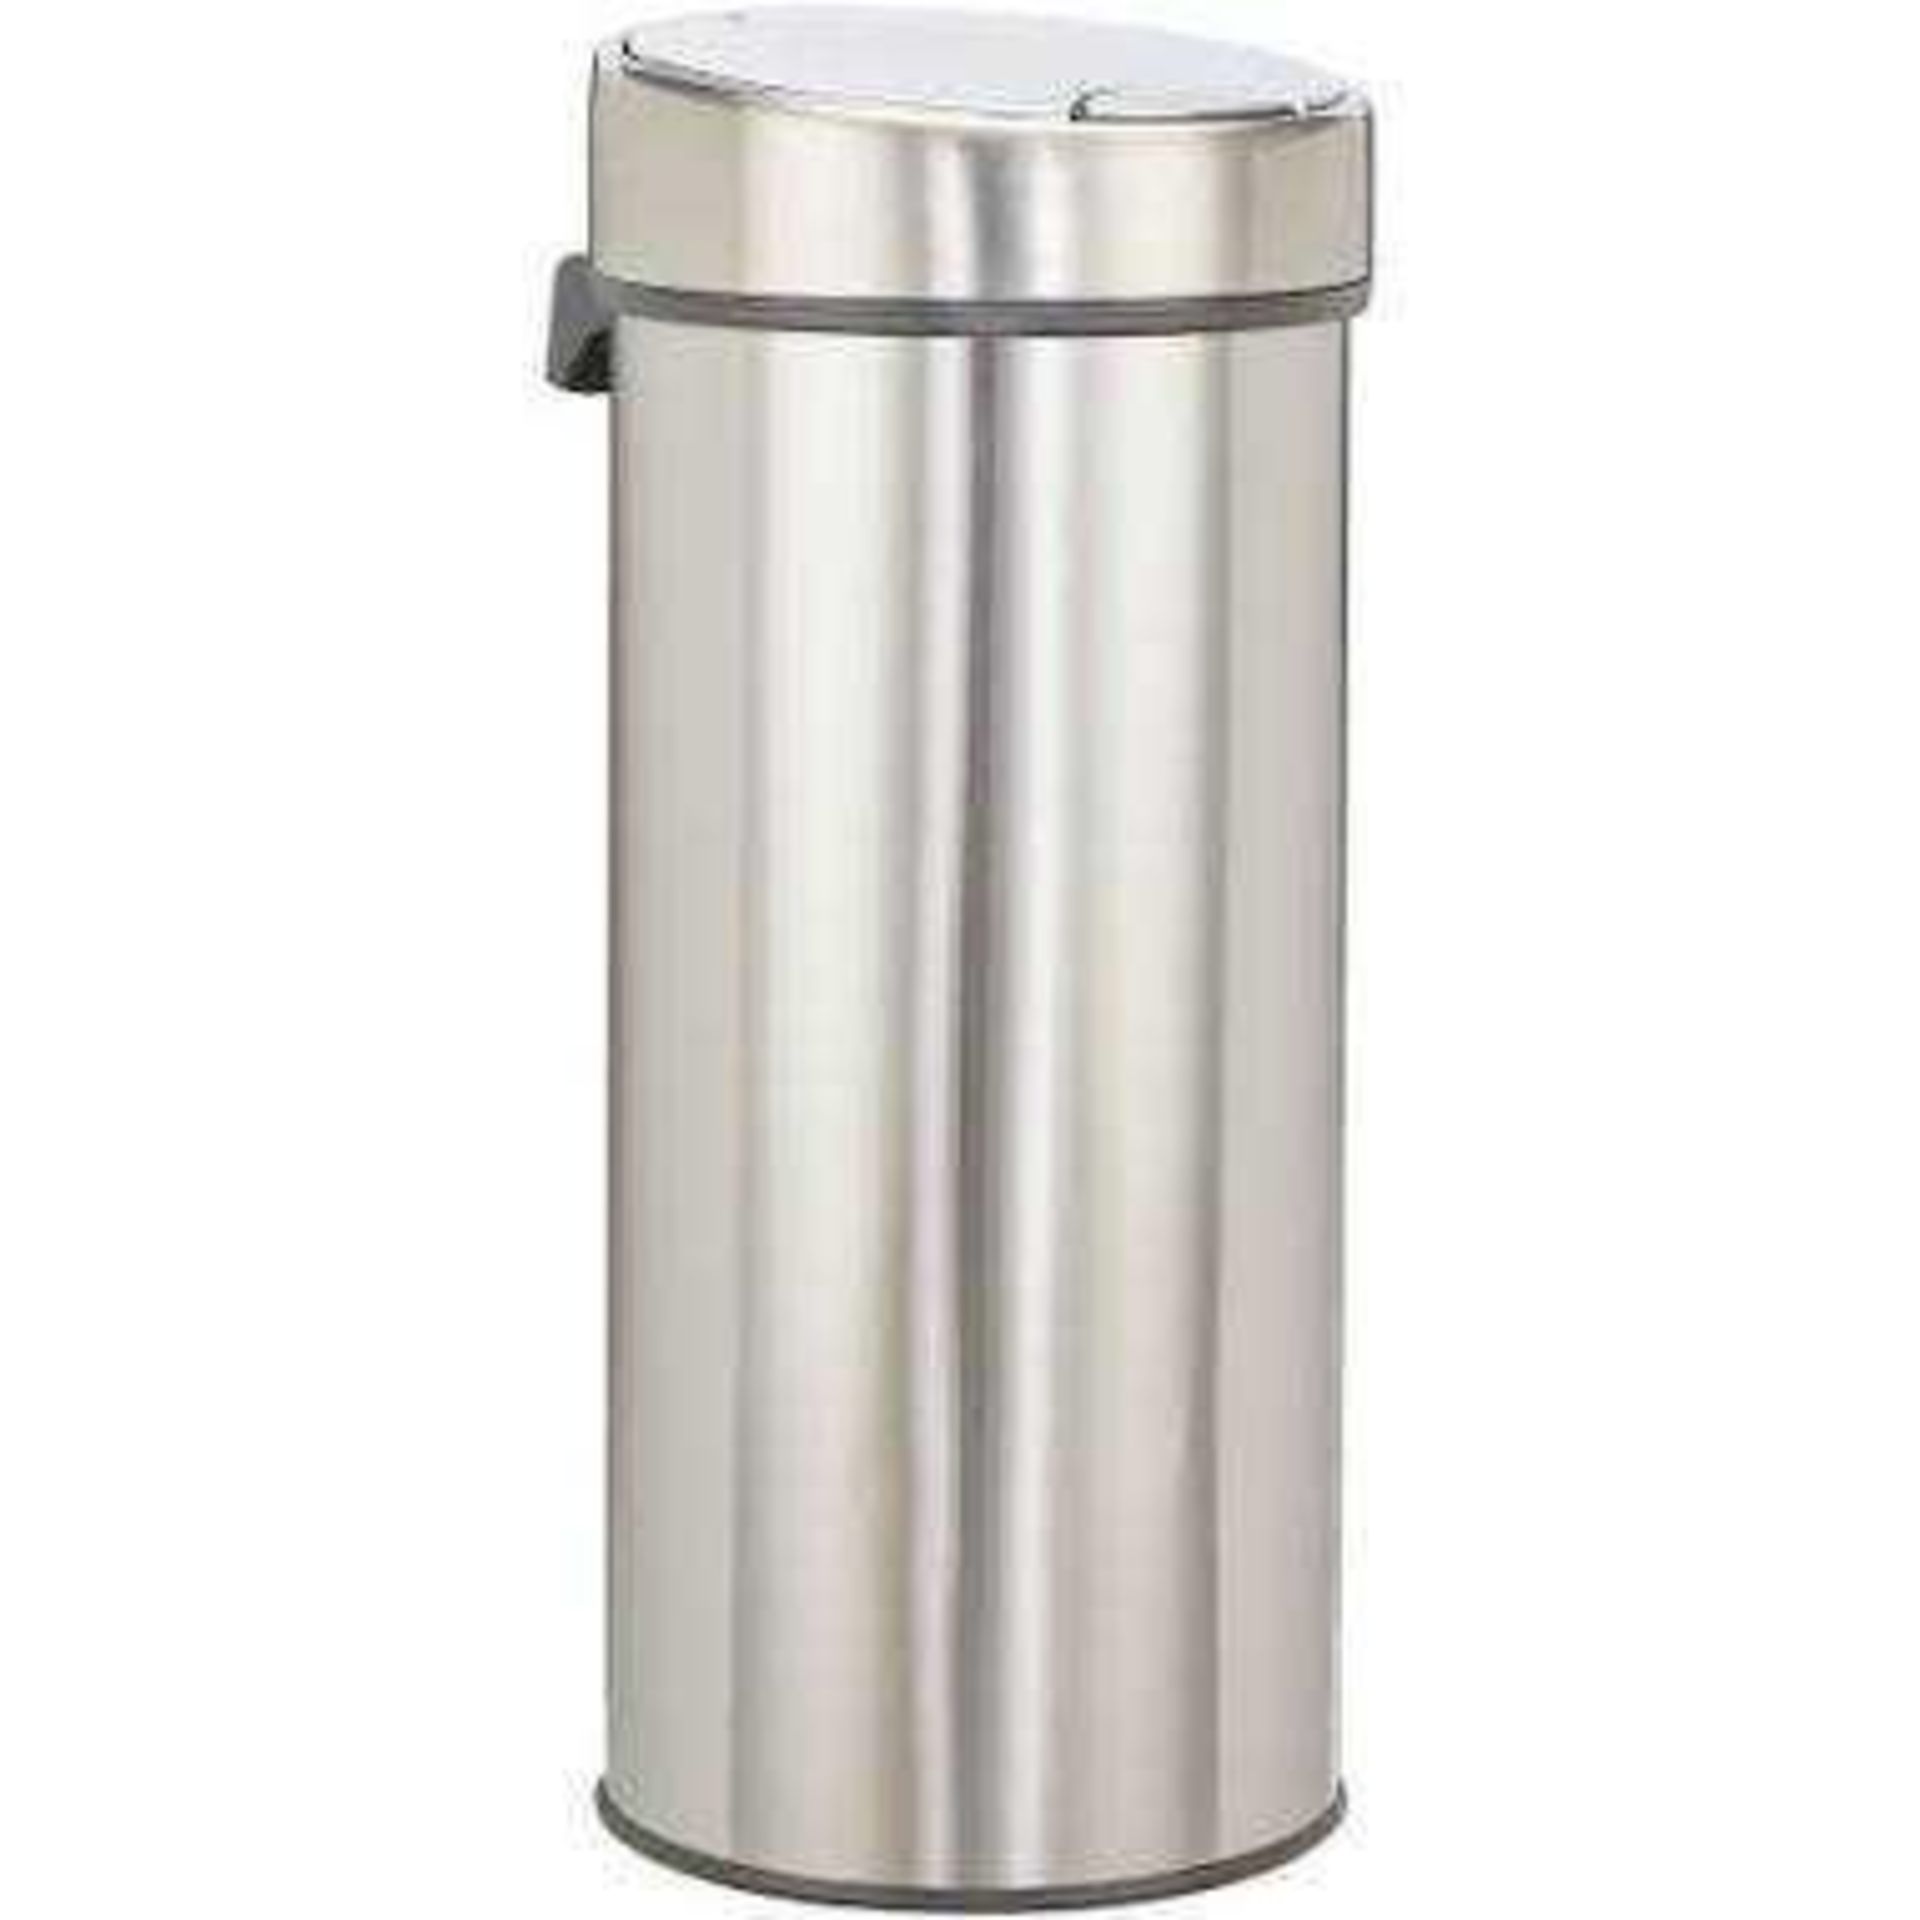 RRP £100 New John Lewis Touch Top Bin,40L,Stainless Steel - Image 2 of 2